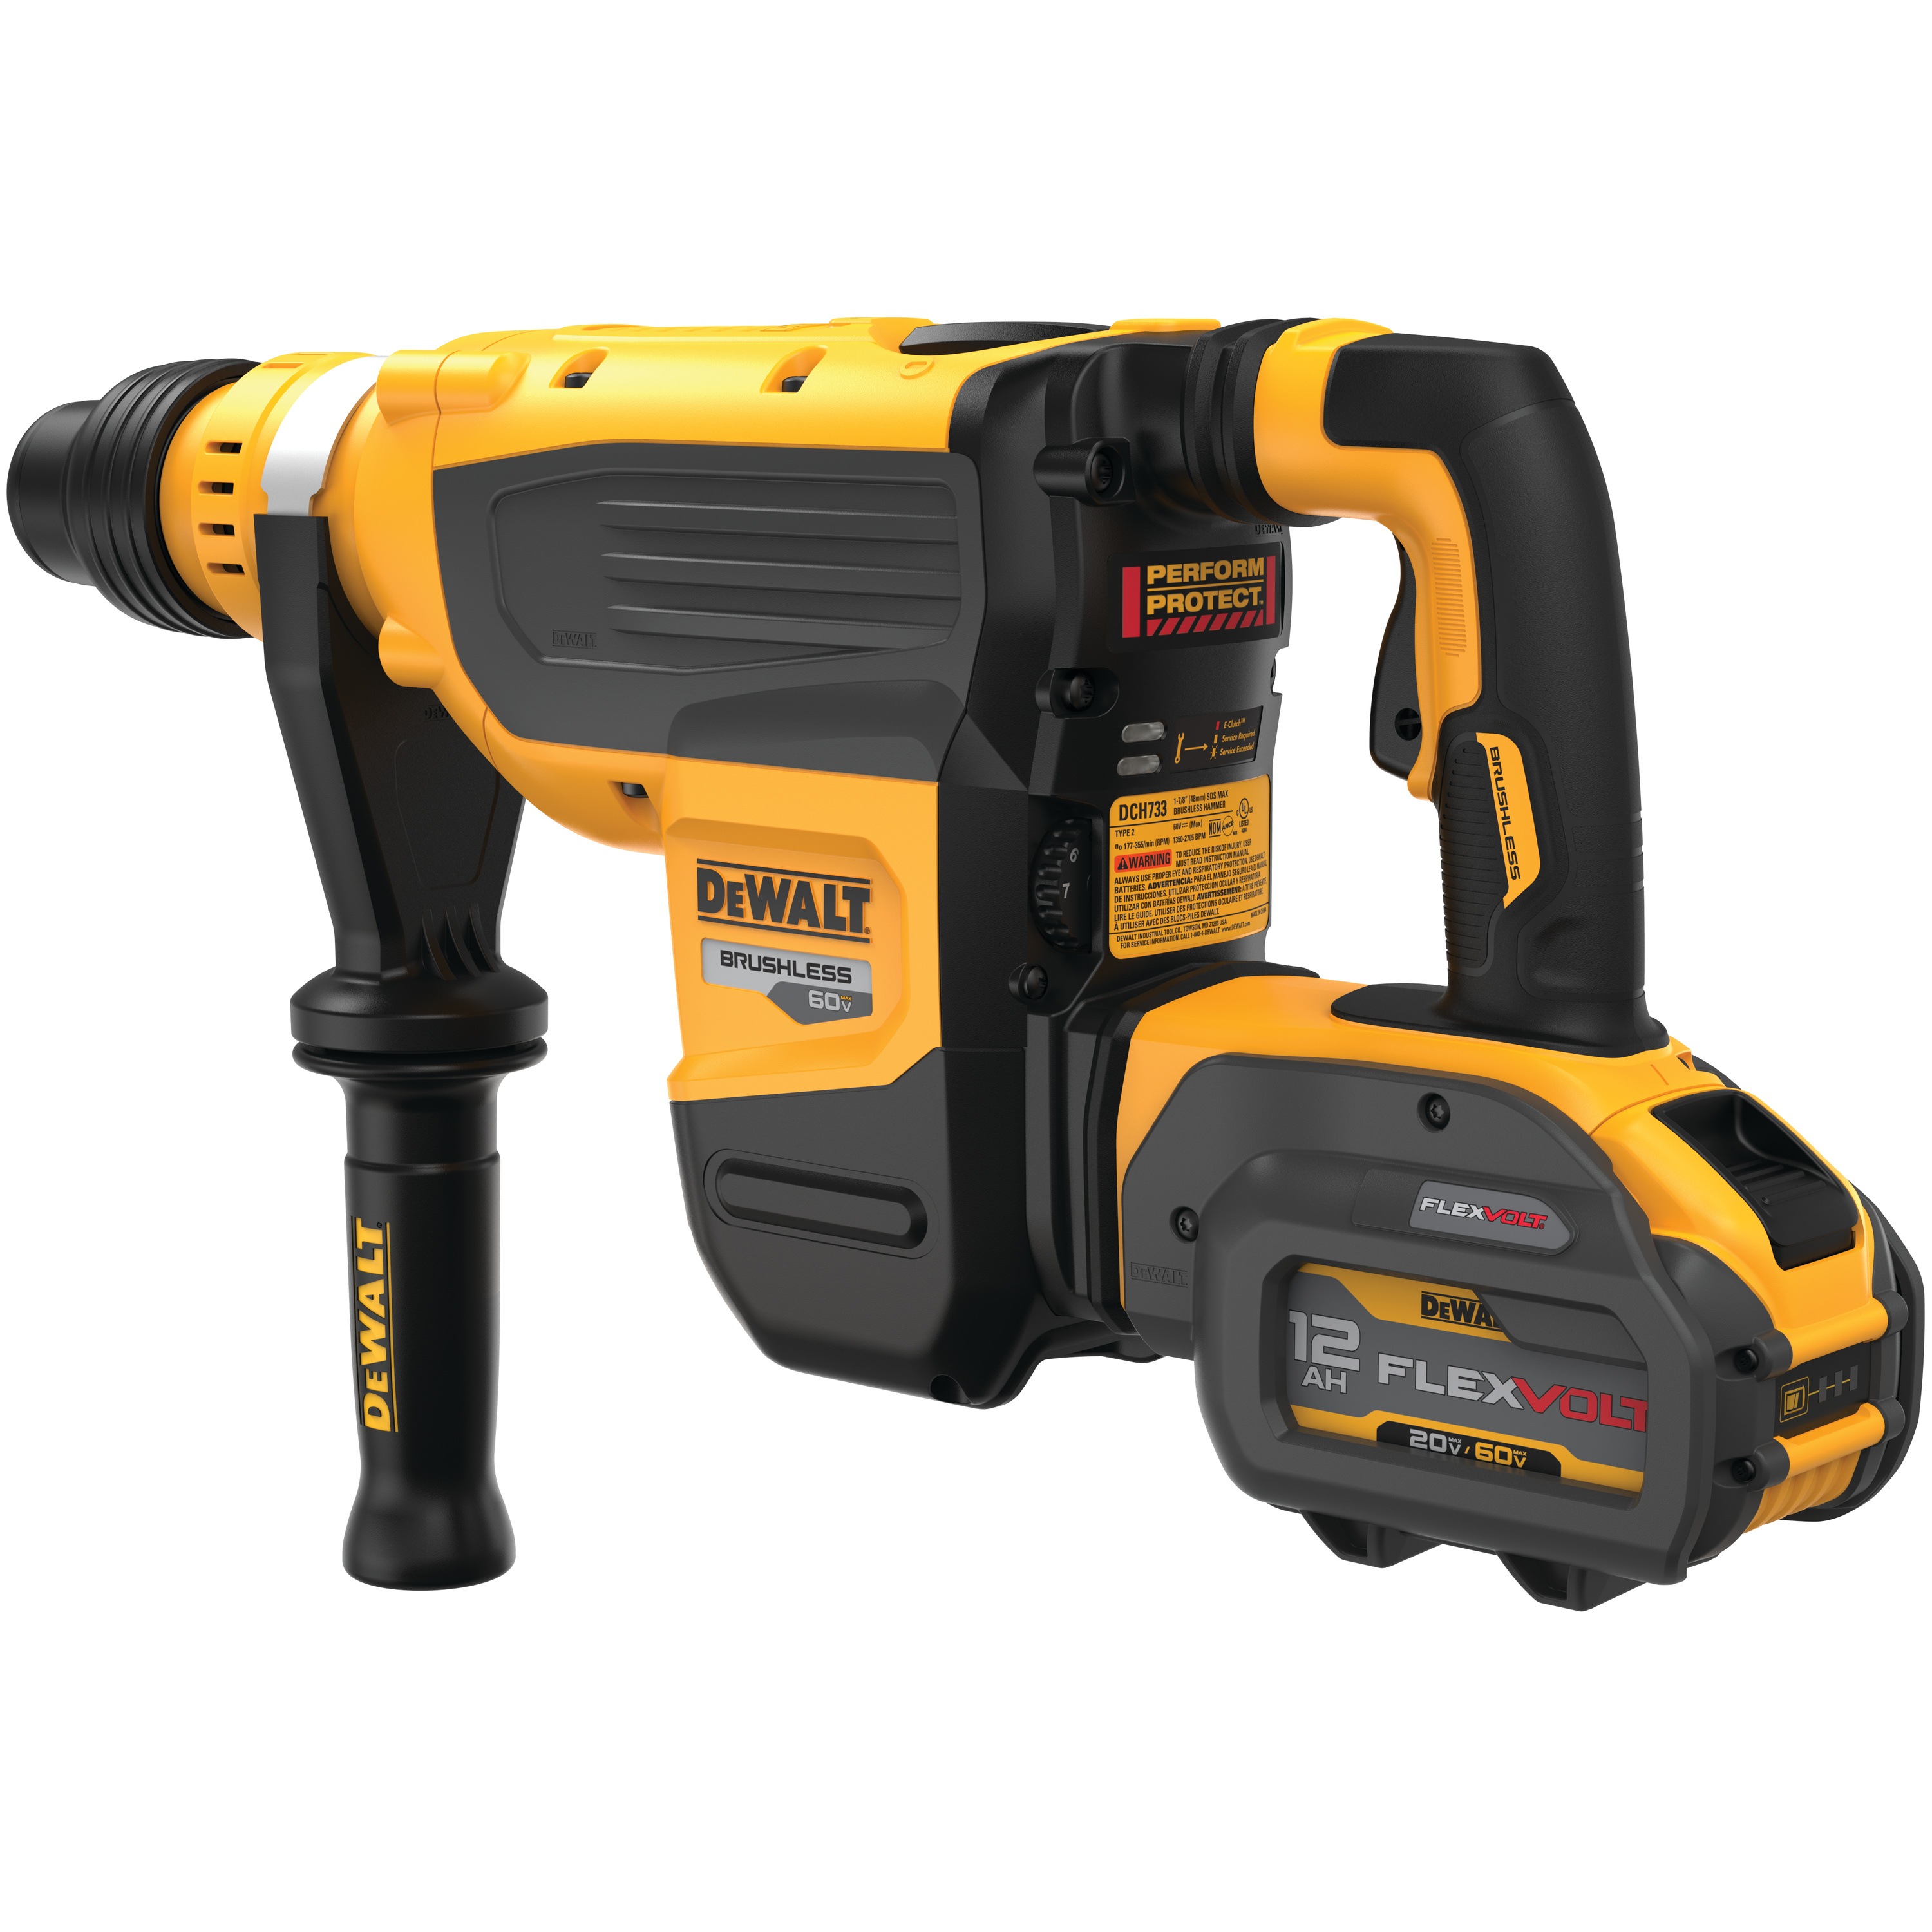 Profile of brushless, cordless SDS MAX combination rotary hammer